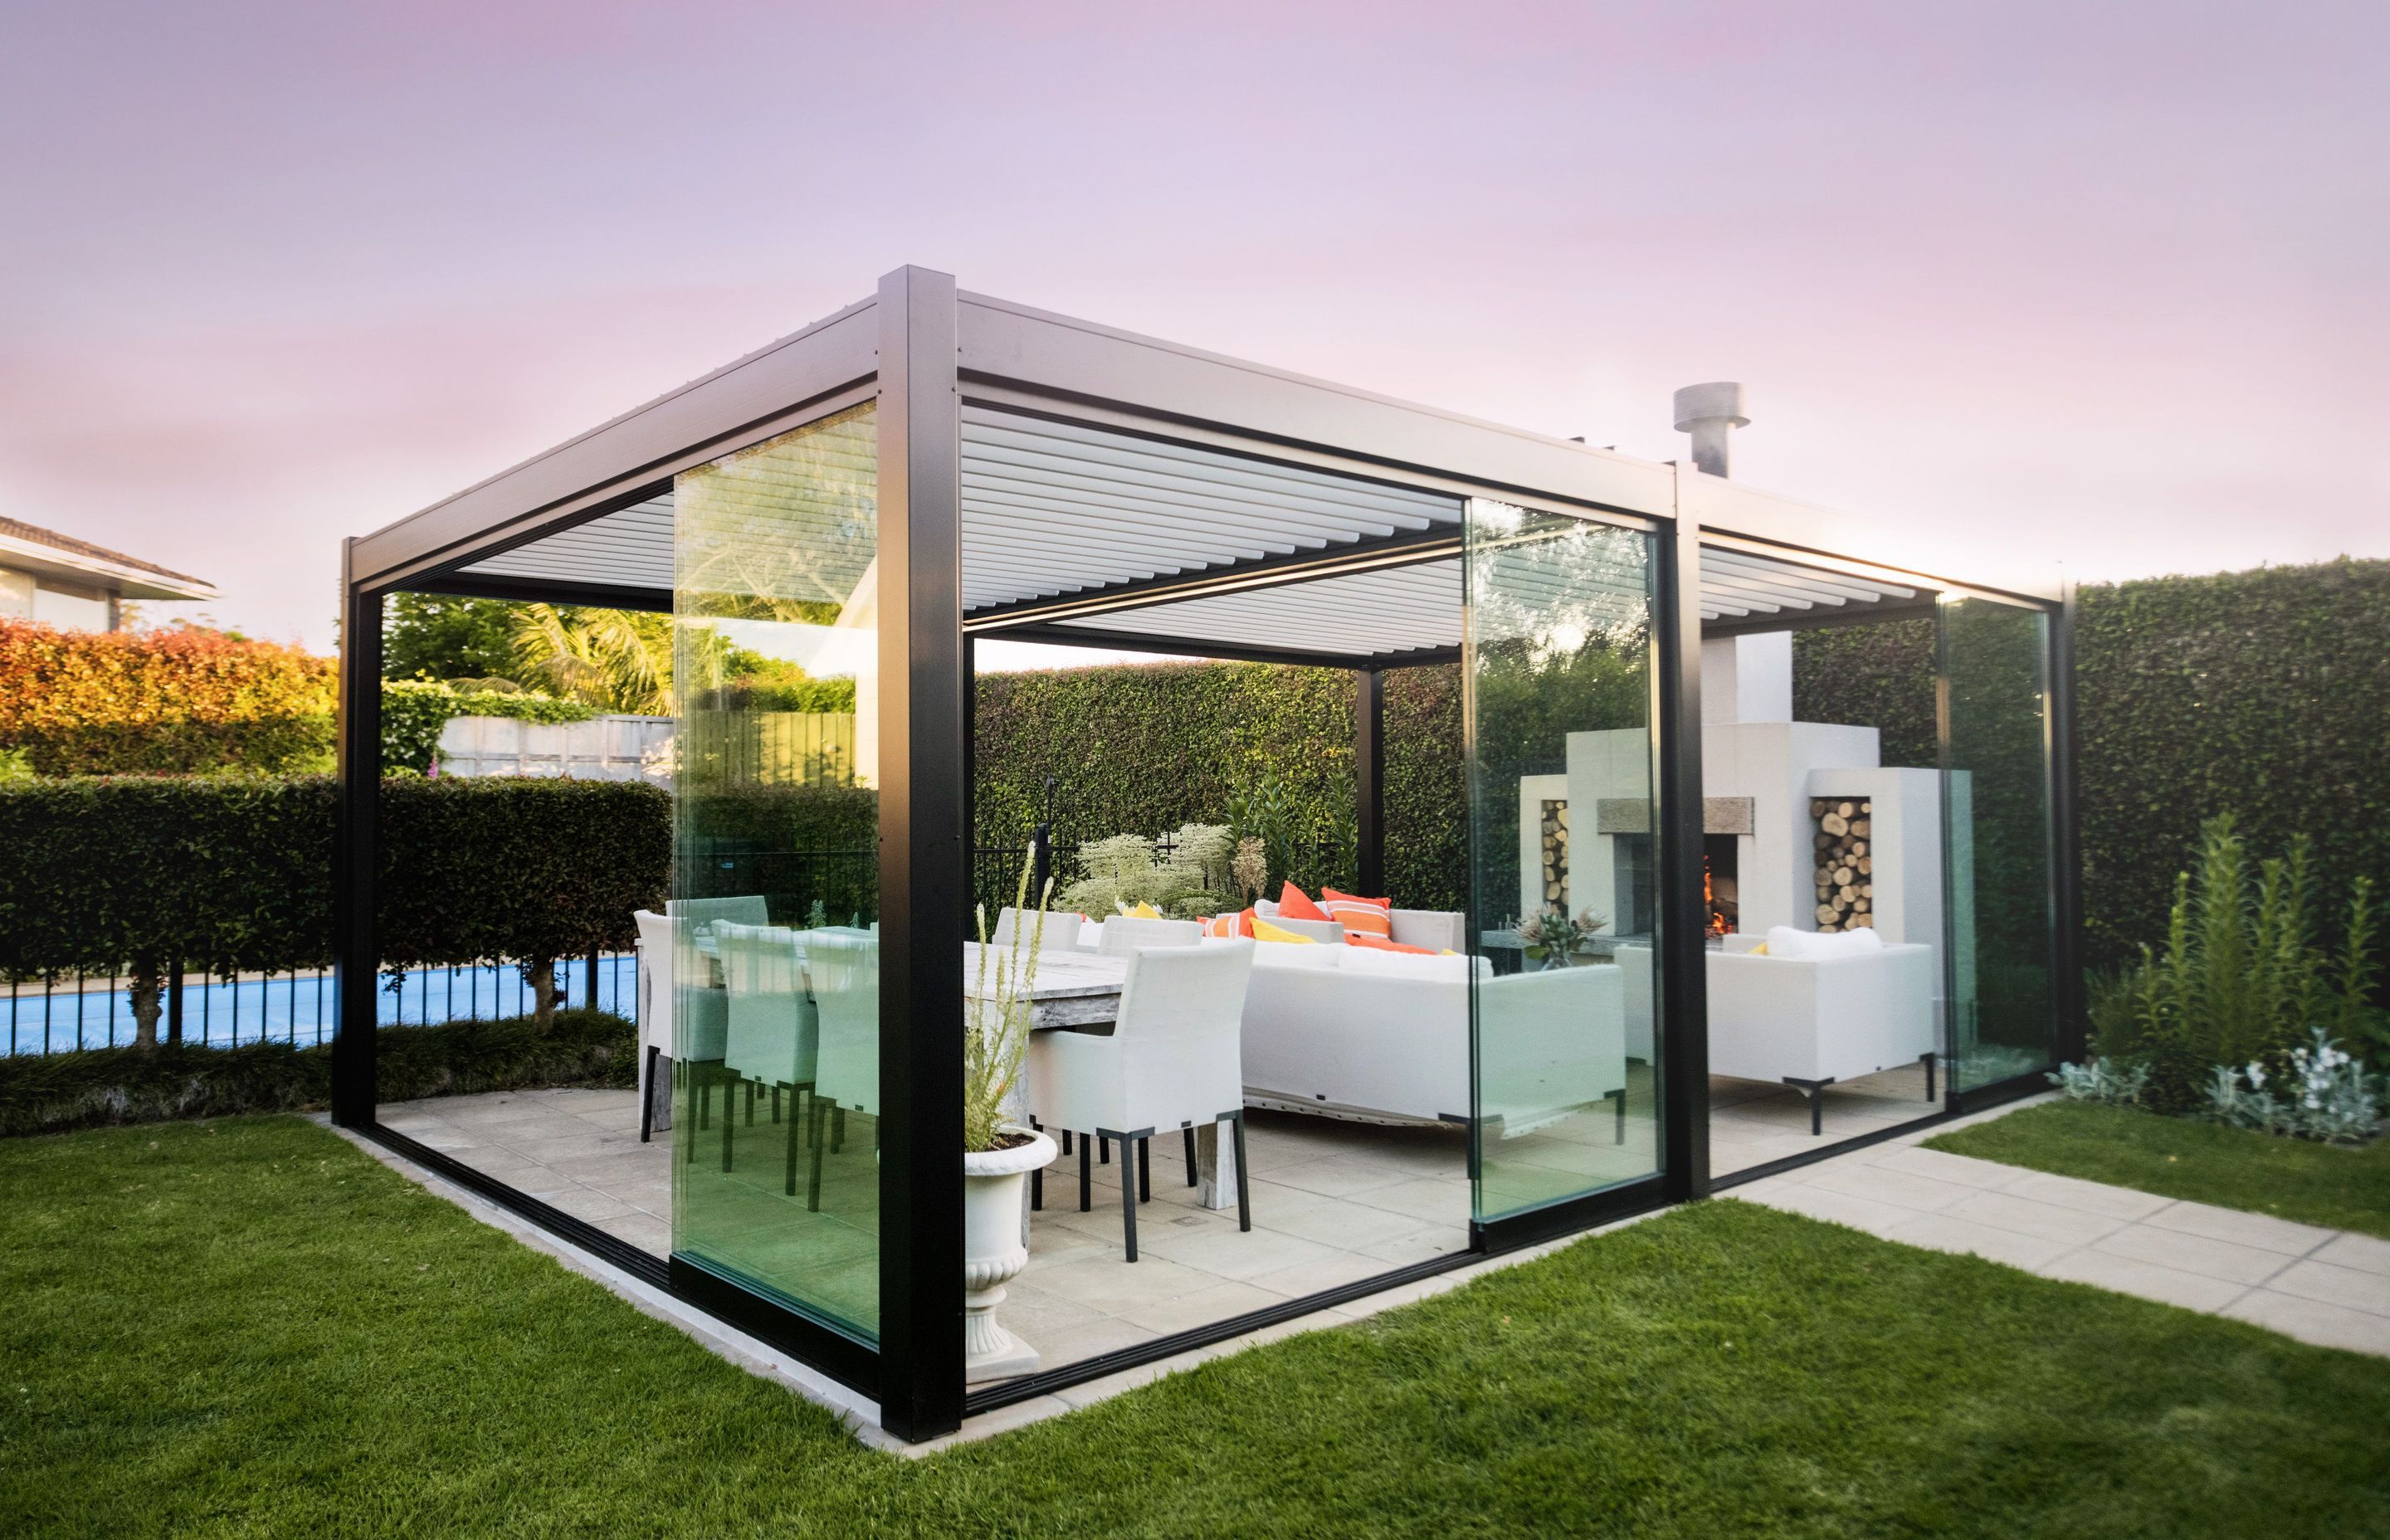 Juralco can design and manufacture your custom outdoor area with glass sliding doors and a louvred roof.